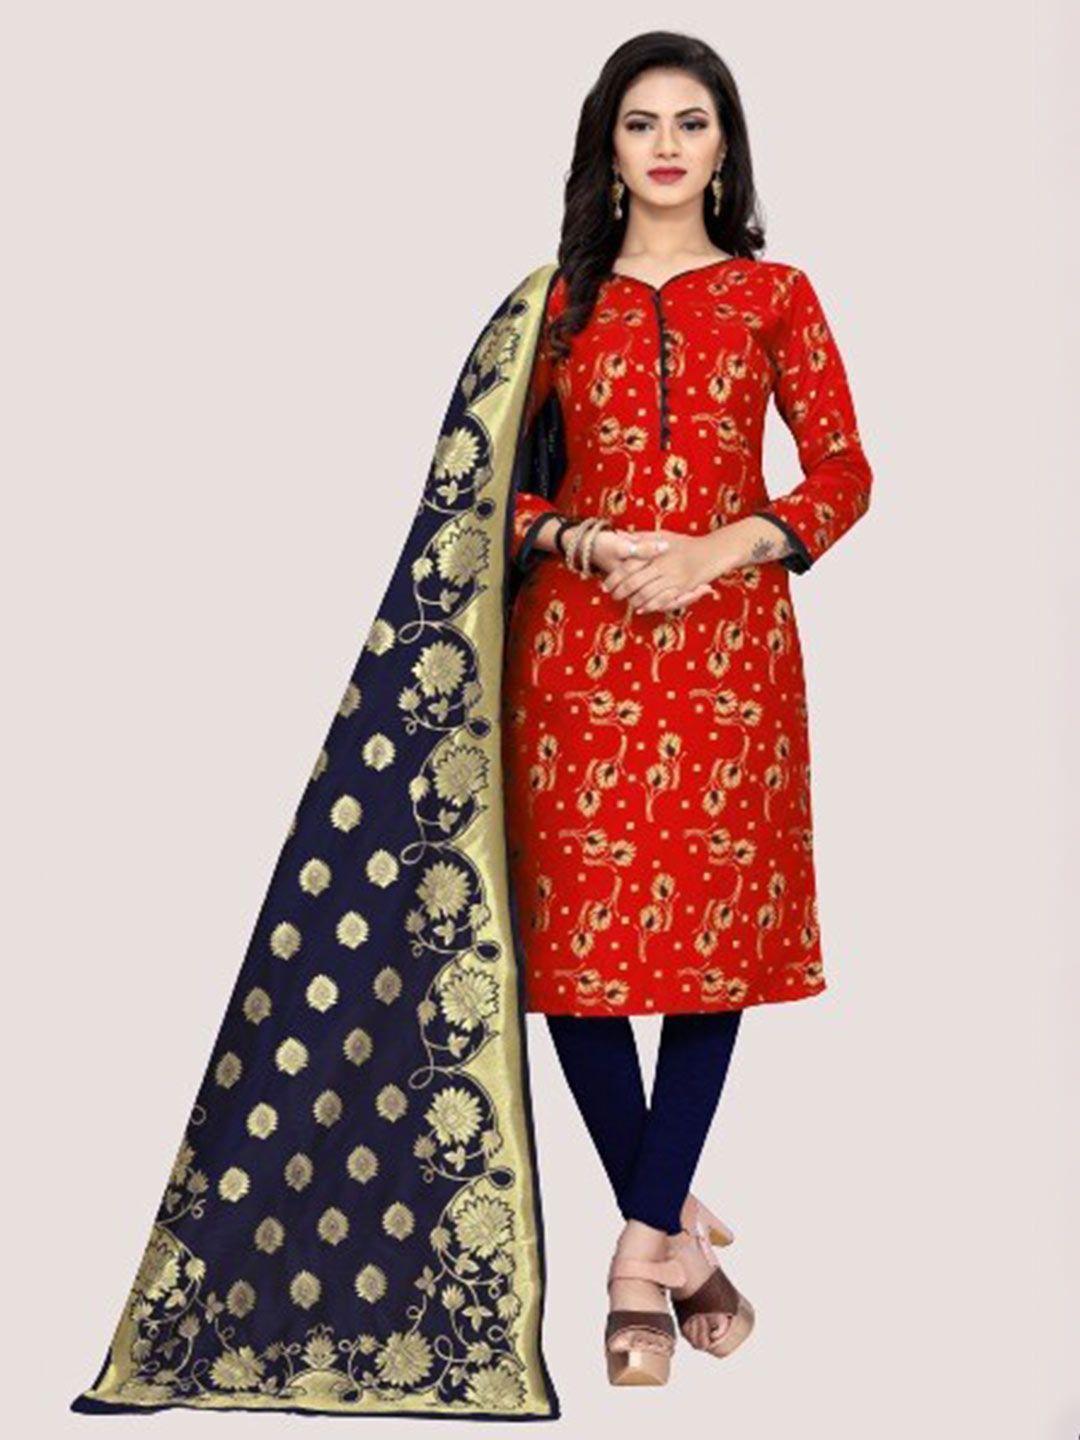 morly-women-red-&-navy-blue-dupion-silk-unstitched-dress-material